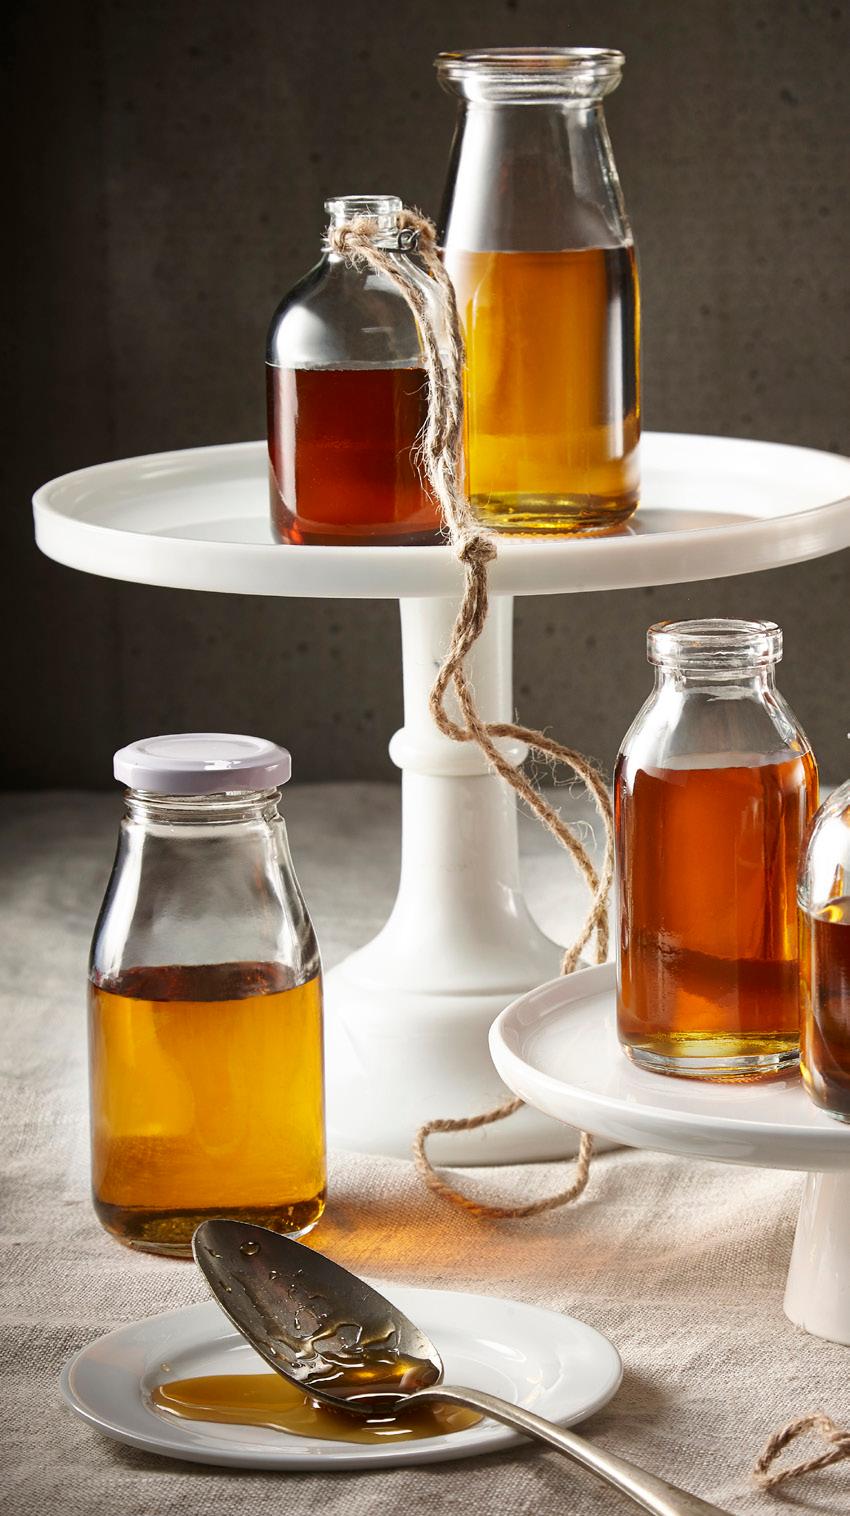 maple grading North American maple syrup has a complex classification system and is graded according to color, clarity, density and strength of maple flavor.